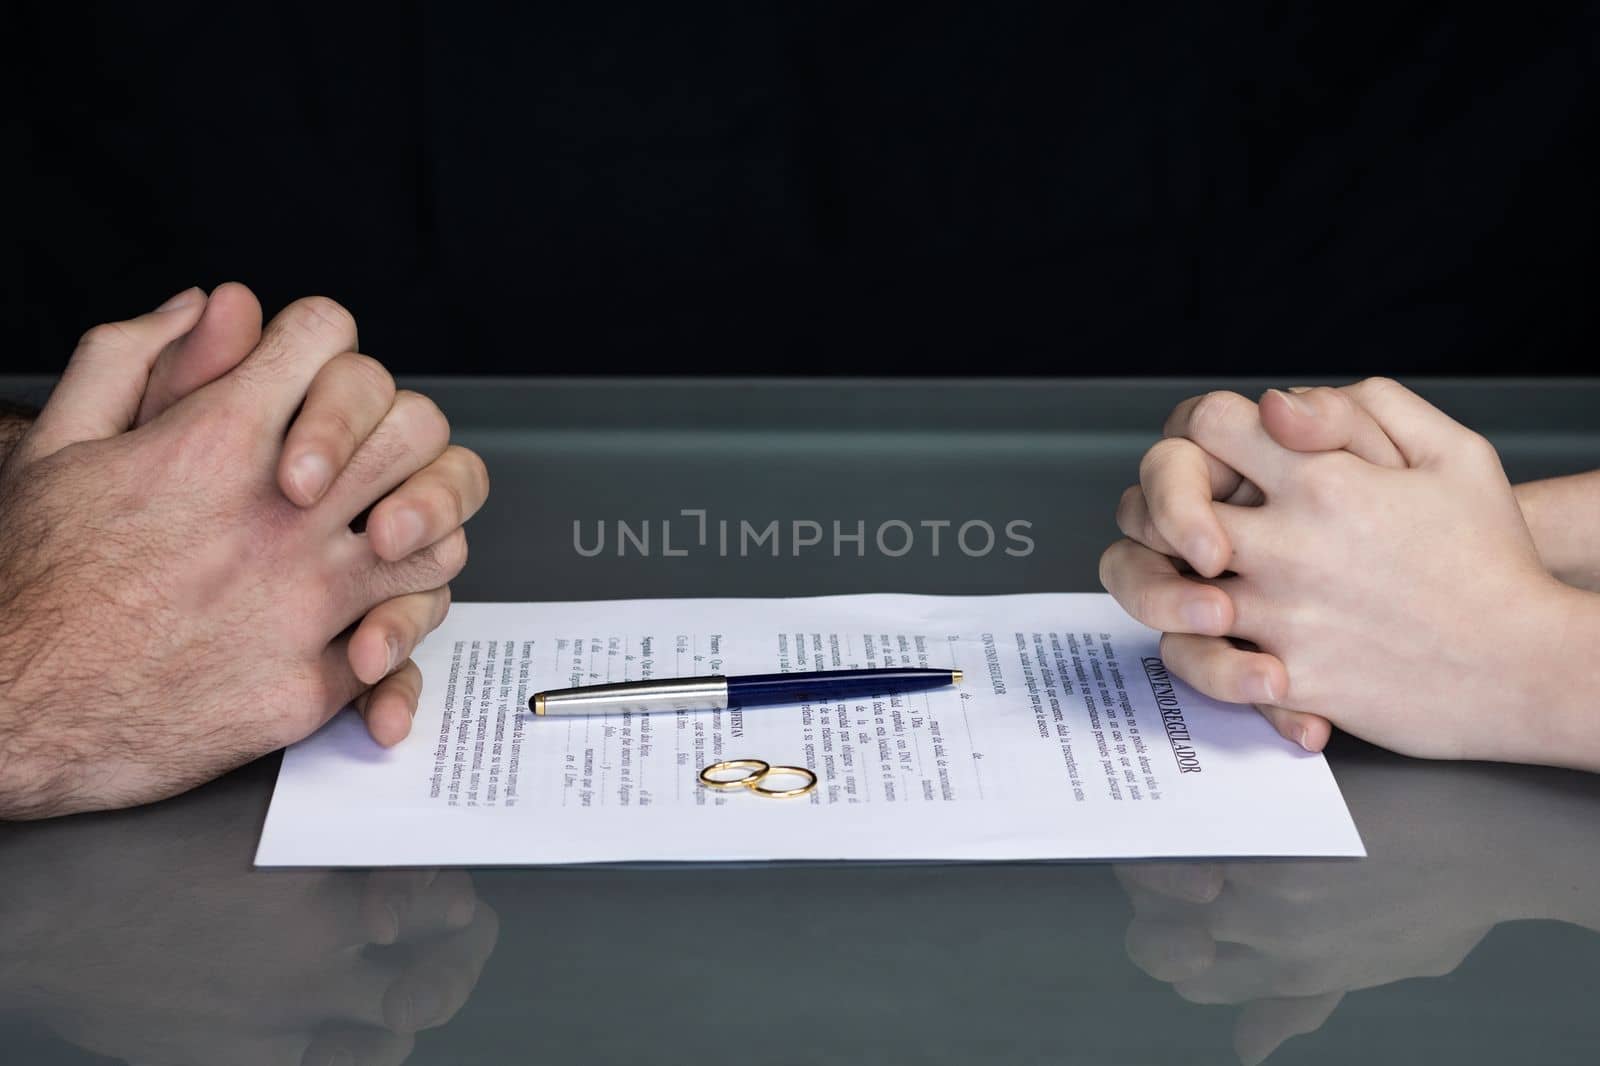 Couple goes through divorce signing papers. High quality photo